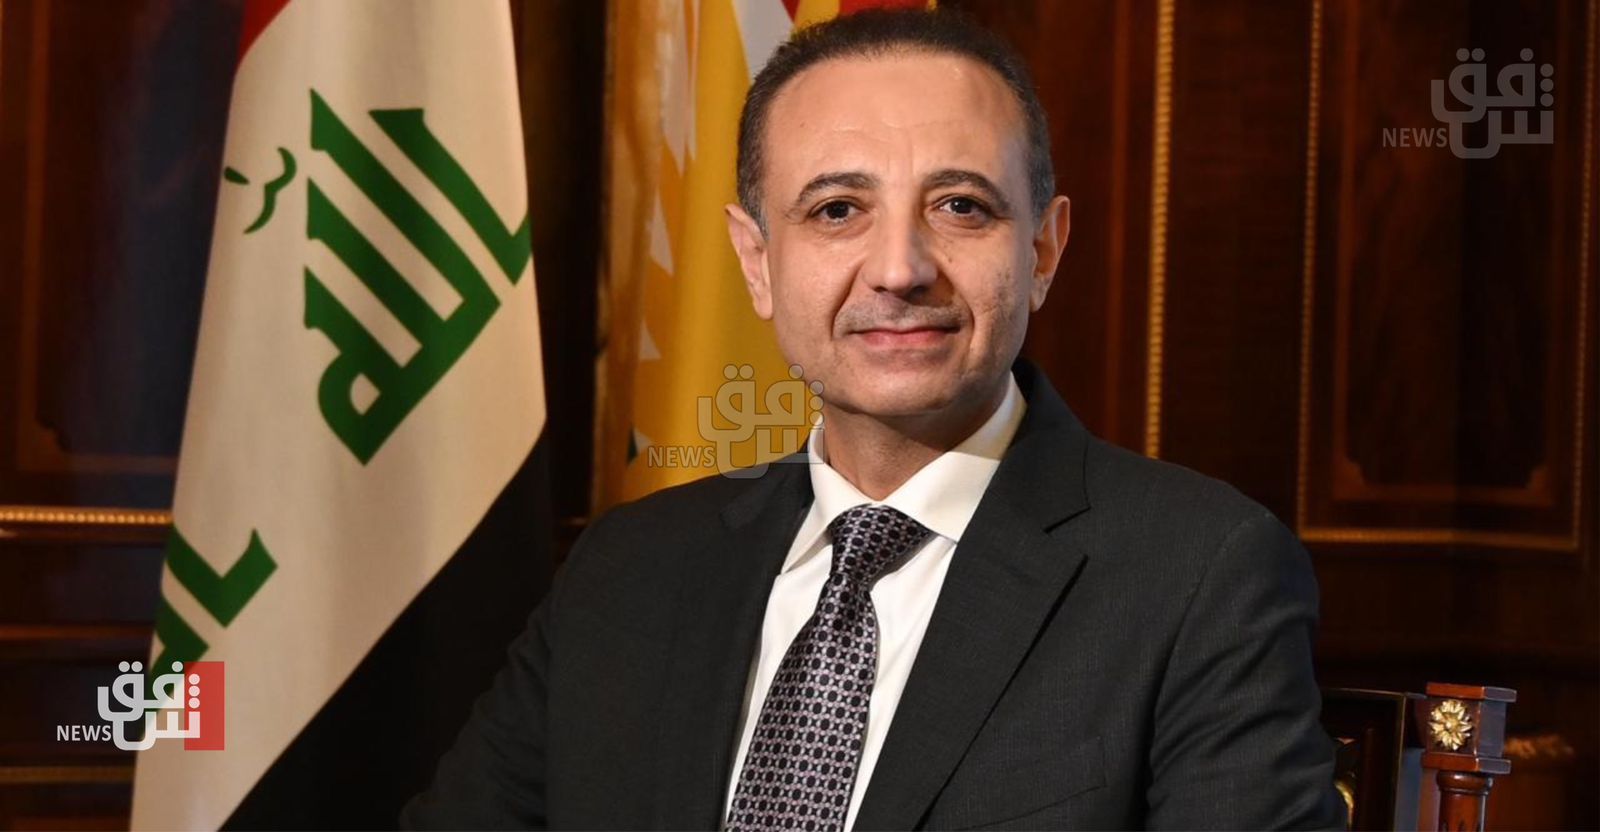 KDP PUK START ANOTHER ROUND OF TALKS TO FORM NEW GOVERNMENT